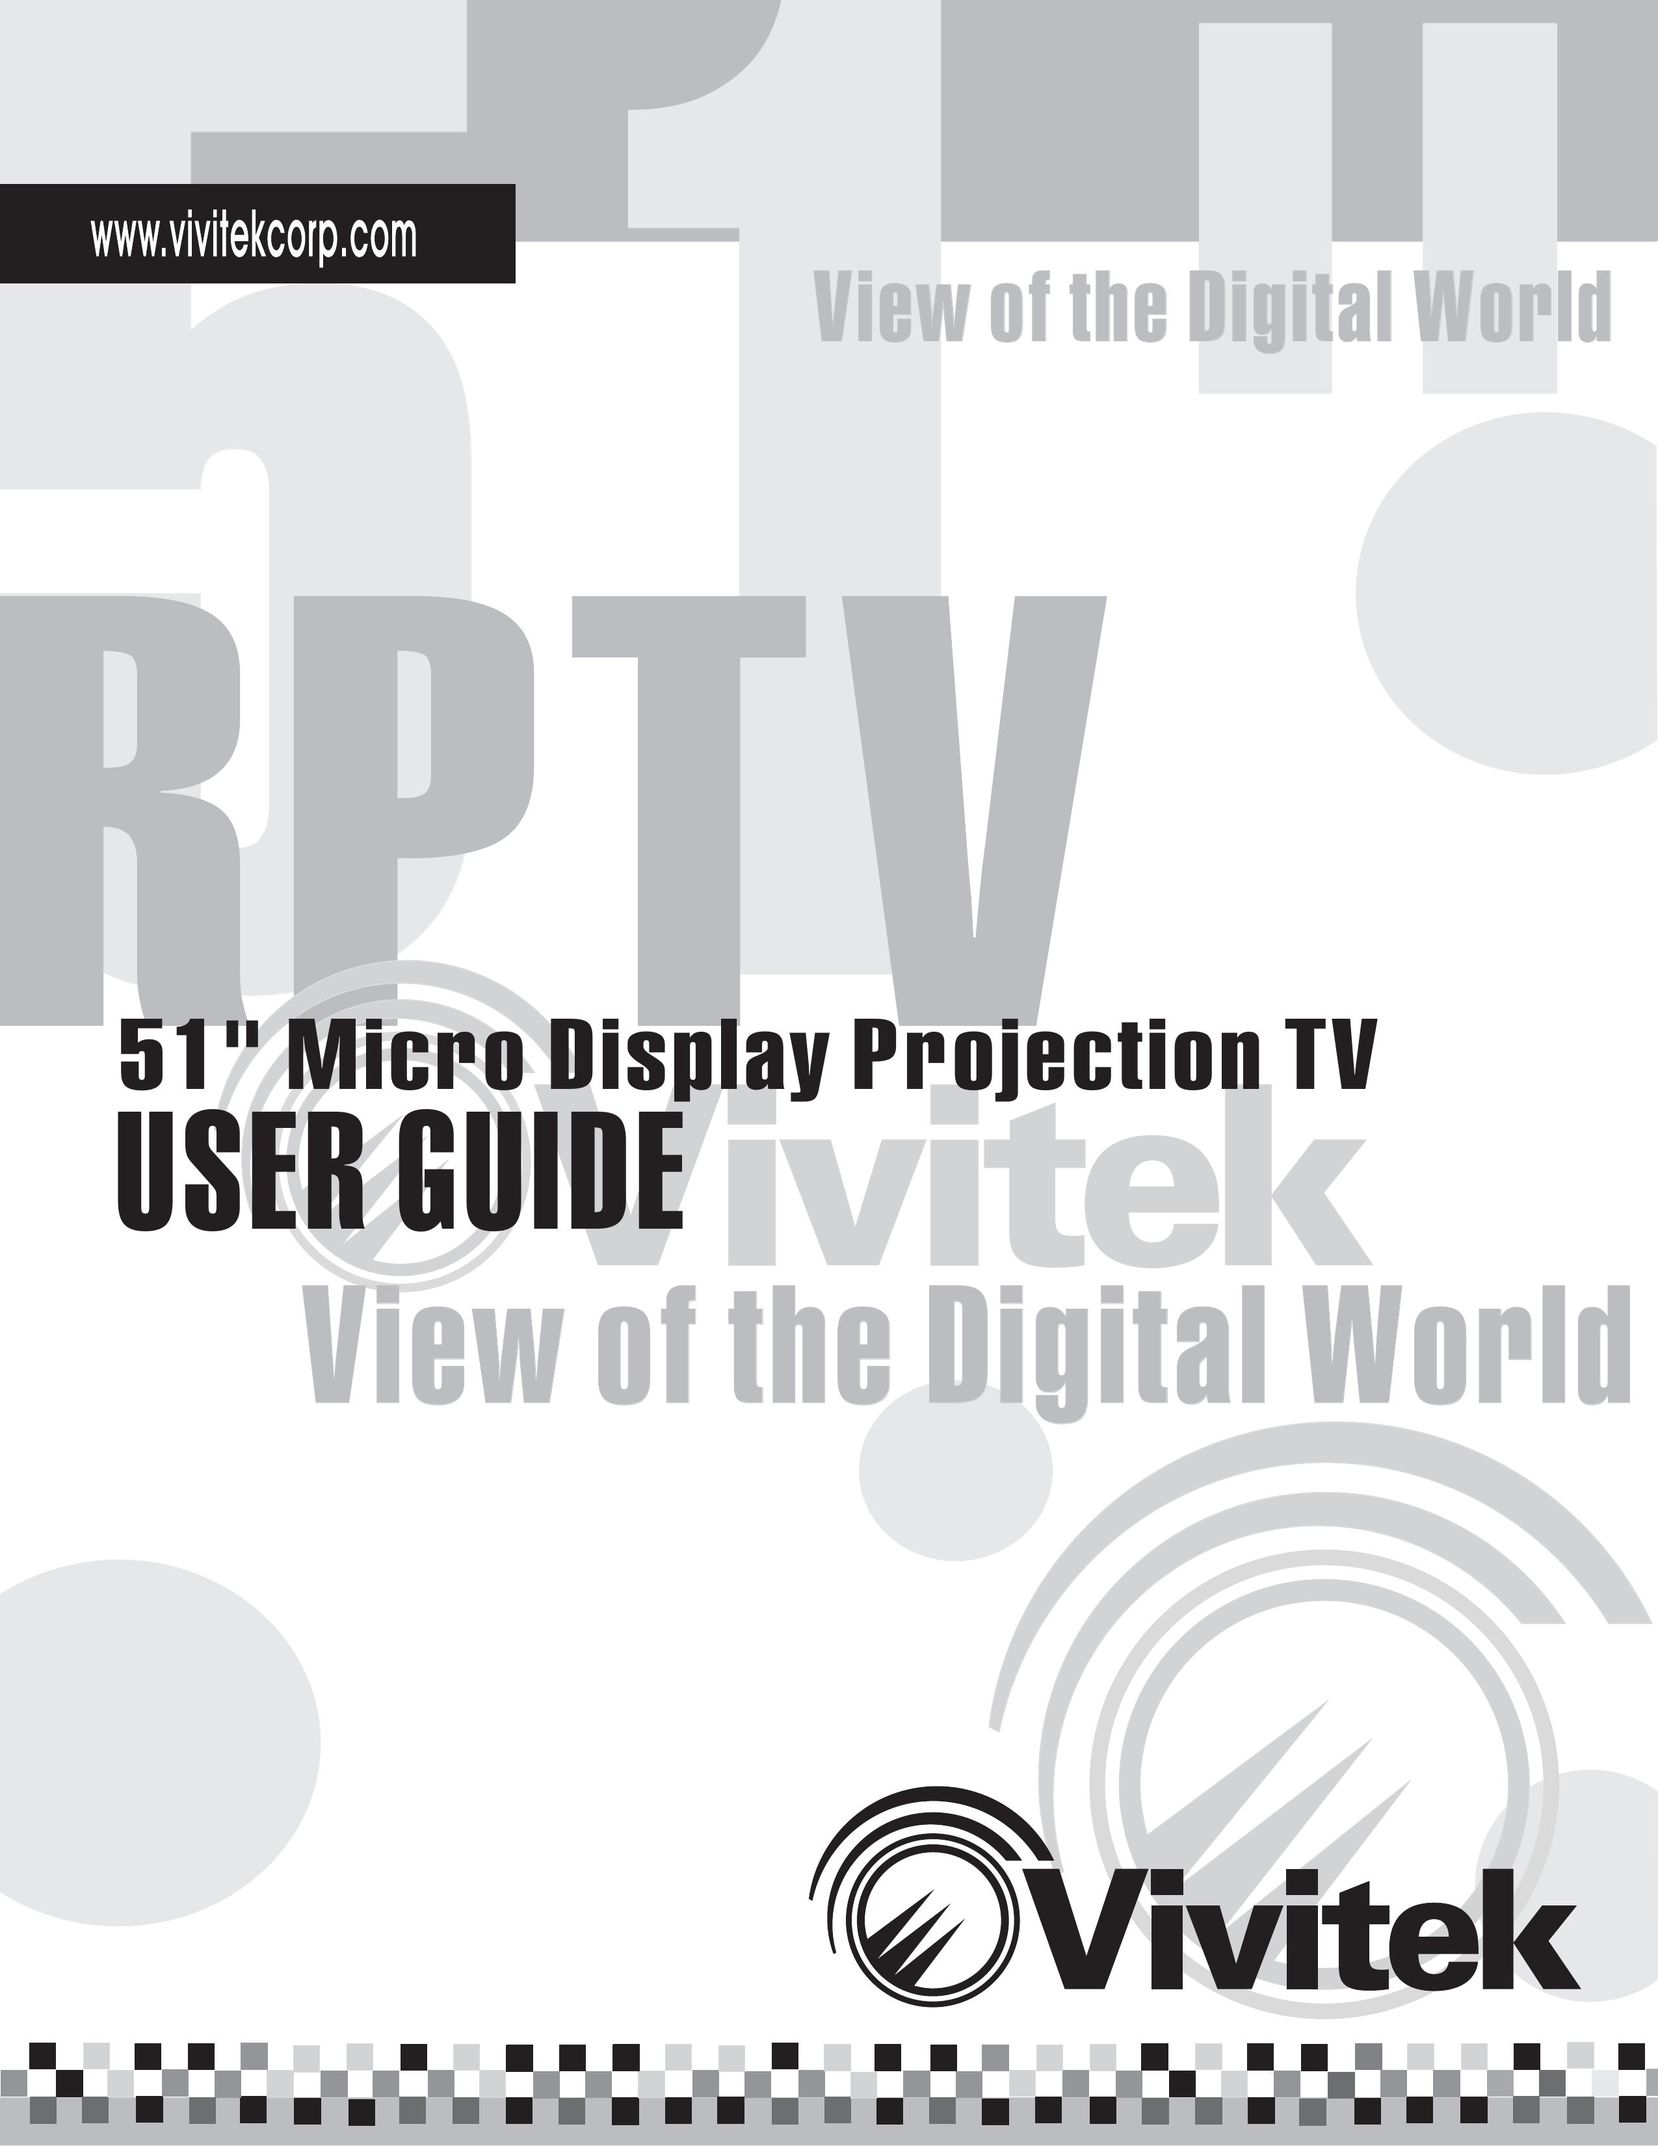 Vivitek 51" Micro Display Projection TV Projection Television User Manual